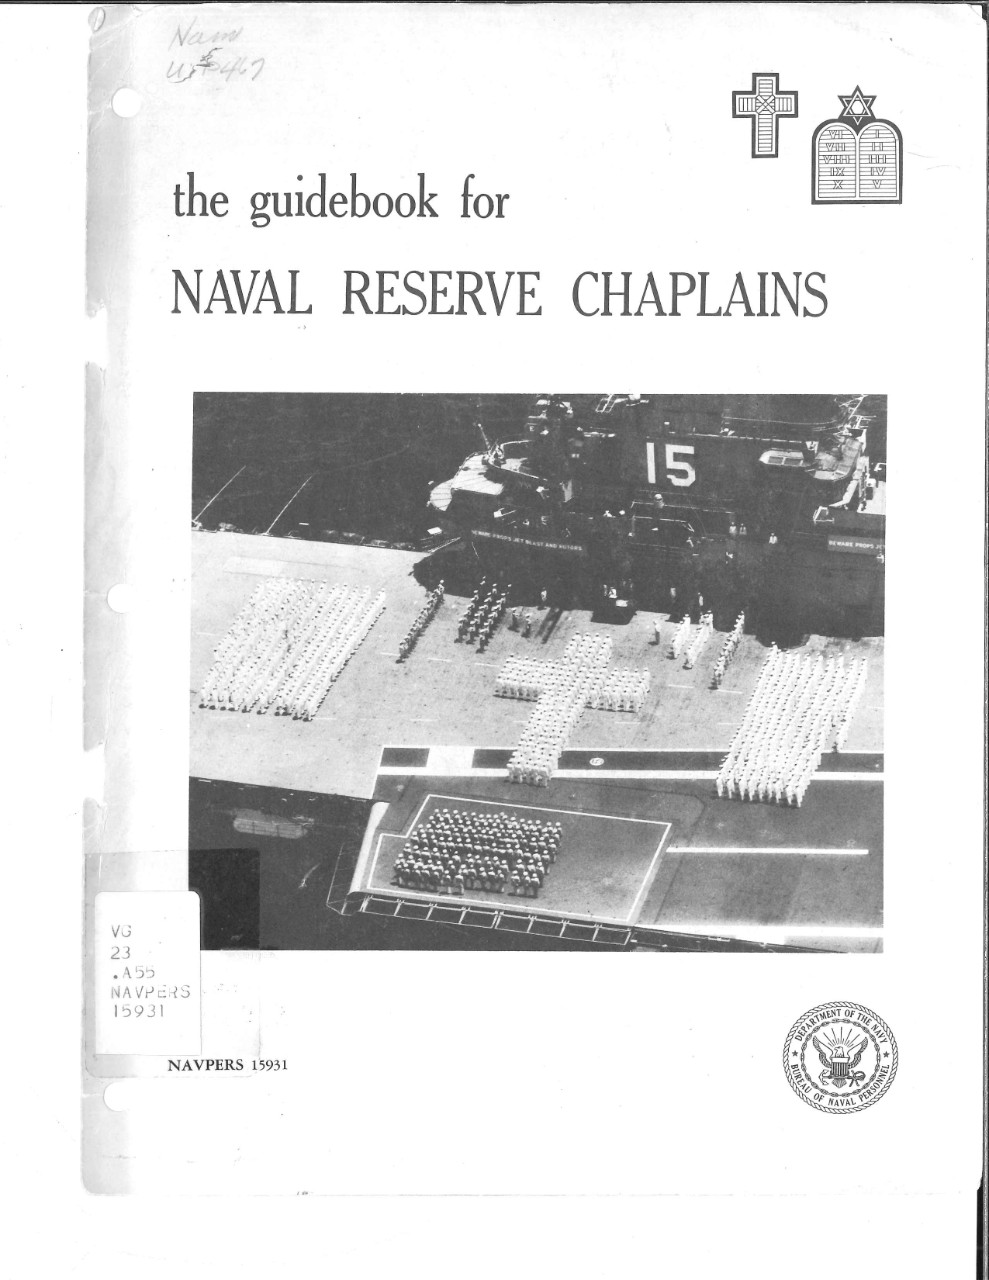 Cover page of book with aerial view of Navy seamen and Ship 15